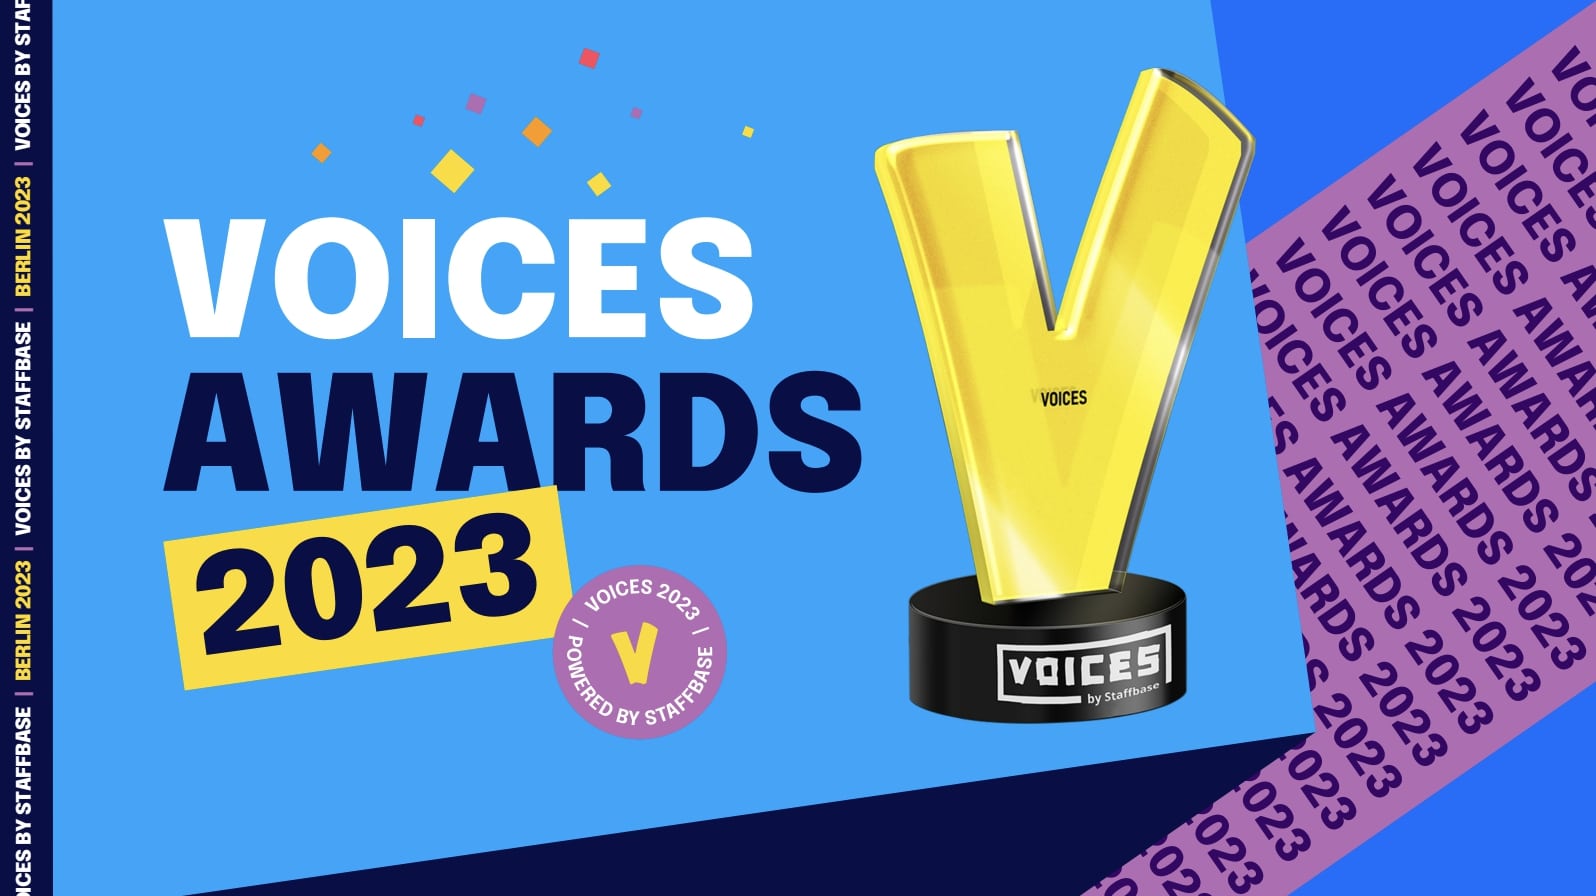 VOICES Awards Series!